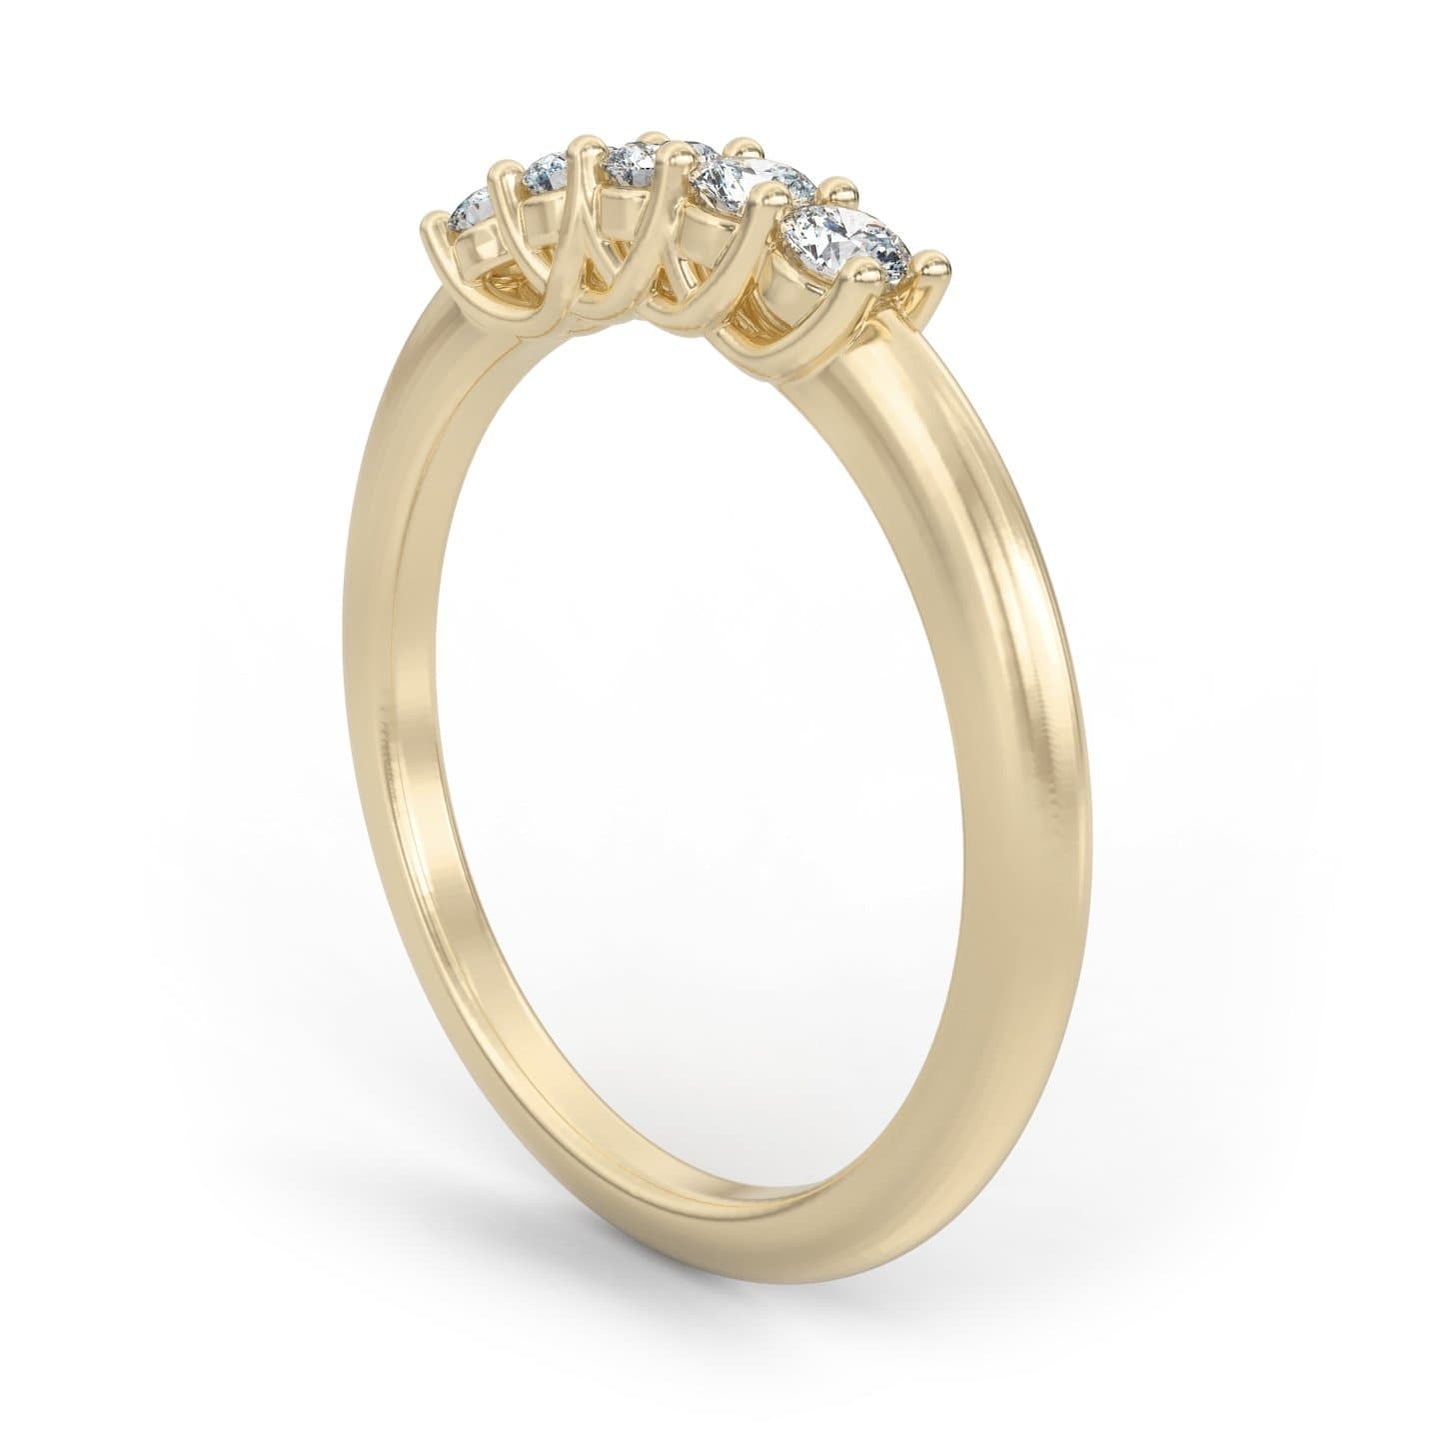 0.25ct Five Stone Diamond Shared Prong Ring in 14k Gold